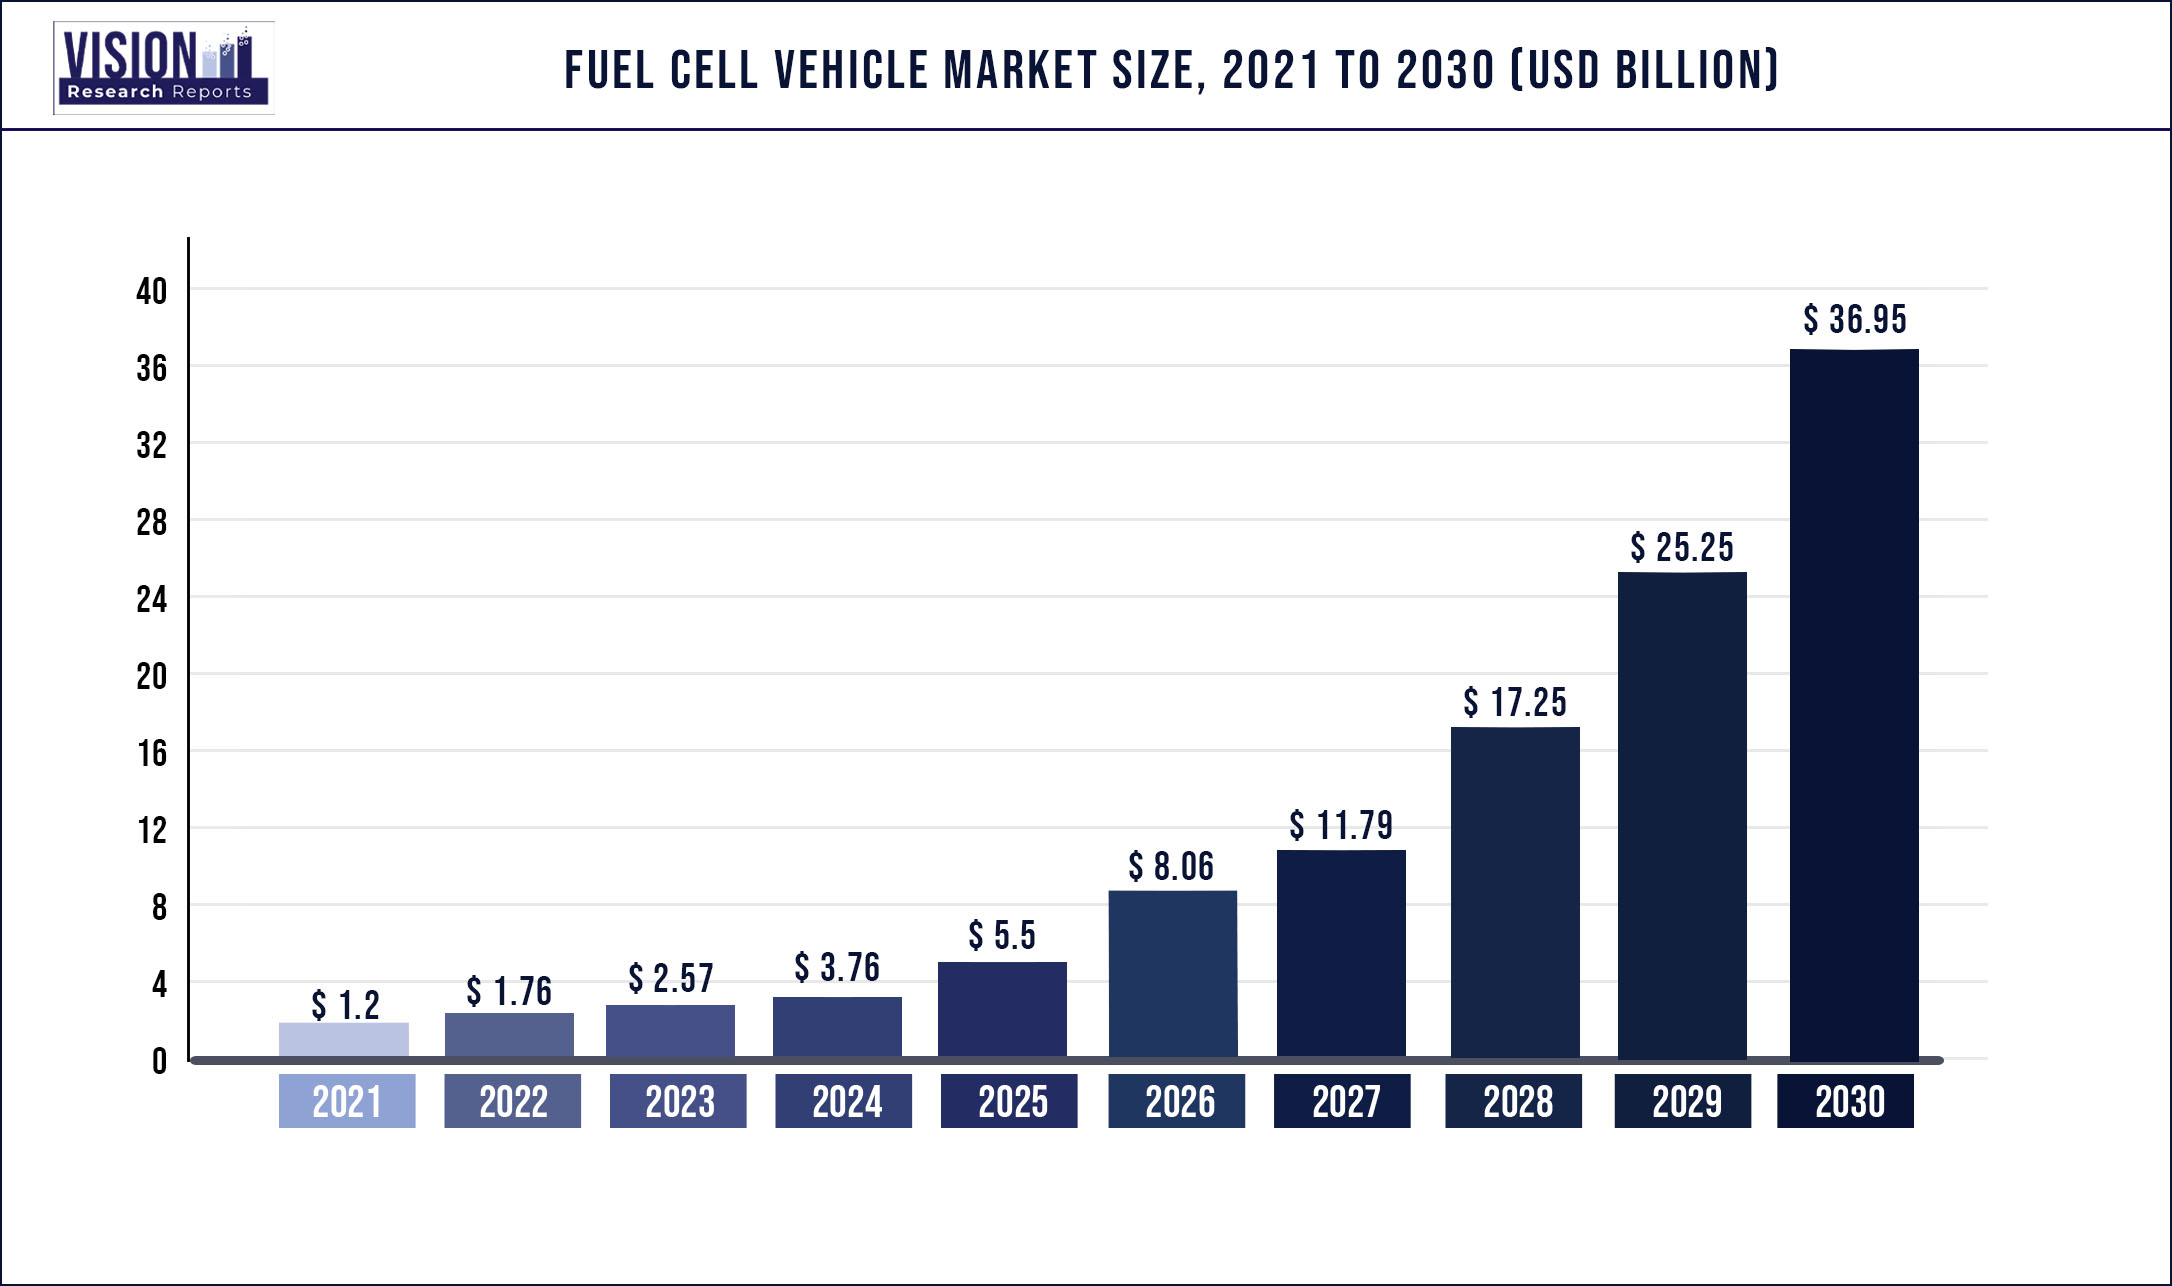 Fuel Cell Vehicle Market Size 2021 to 2030